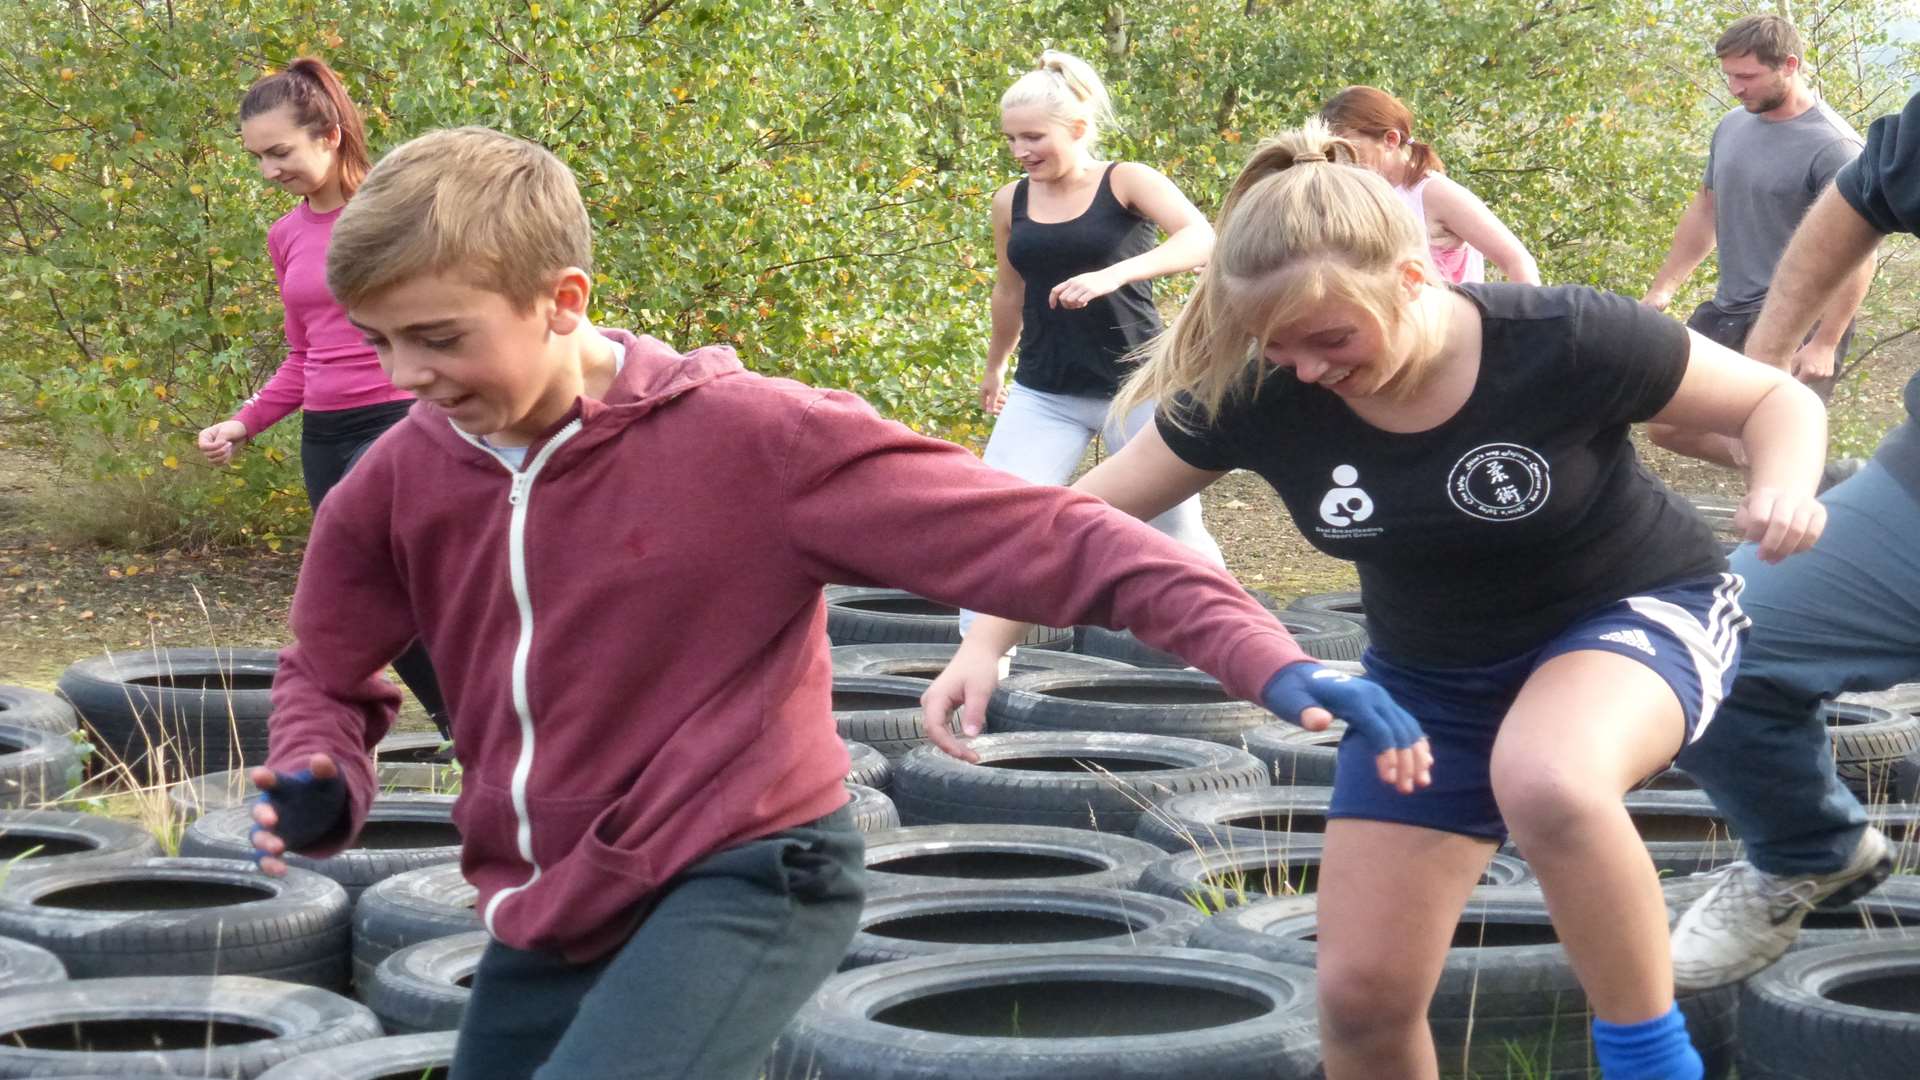 Still time to sign up a team of six for the KM Assault Course Challenge on Sunday, October 8.